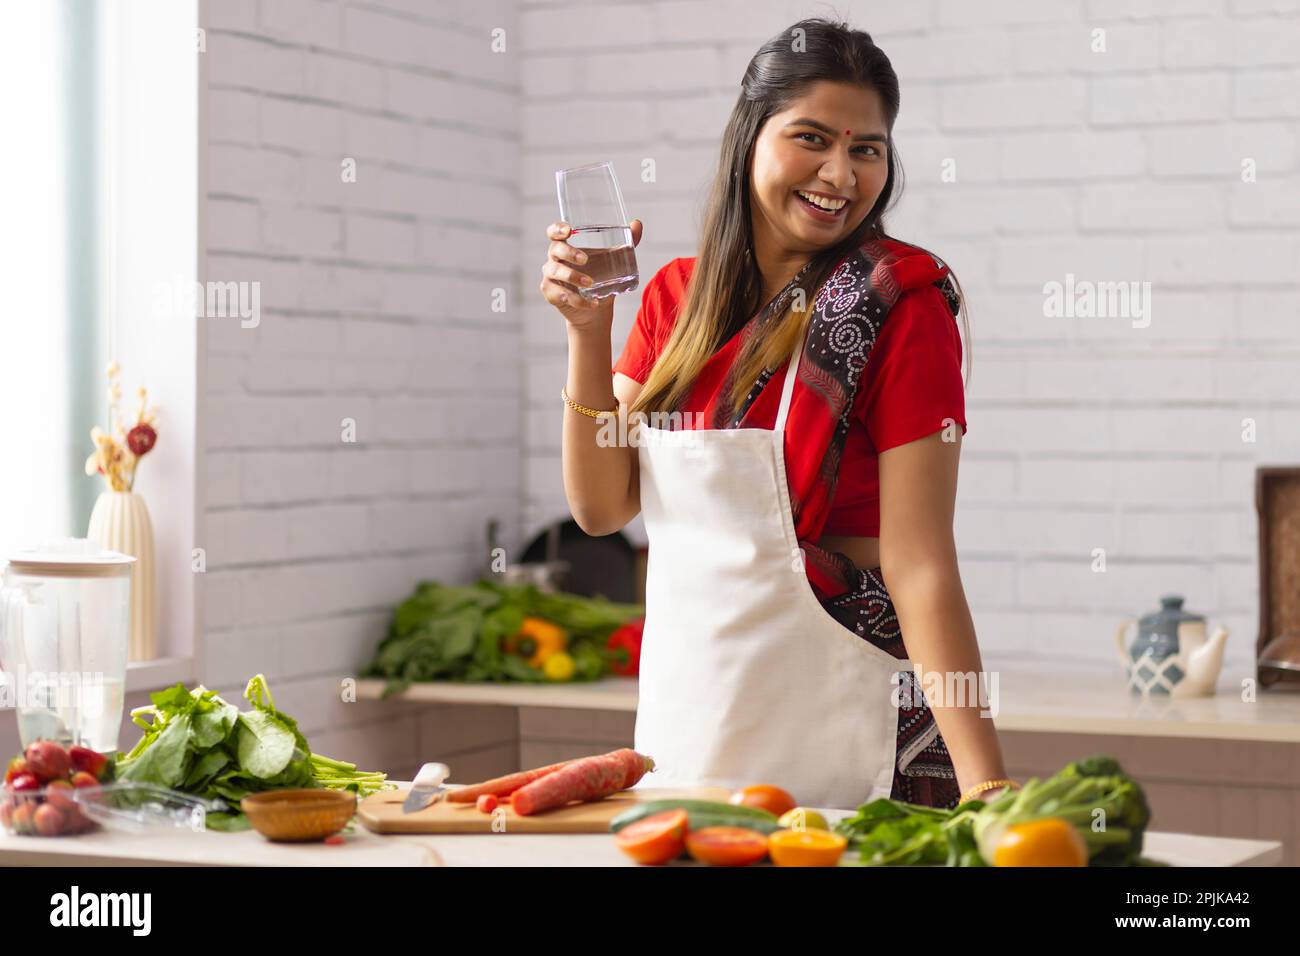 Woman drinking water while chopping vegetables in kitchen Stock Photo